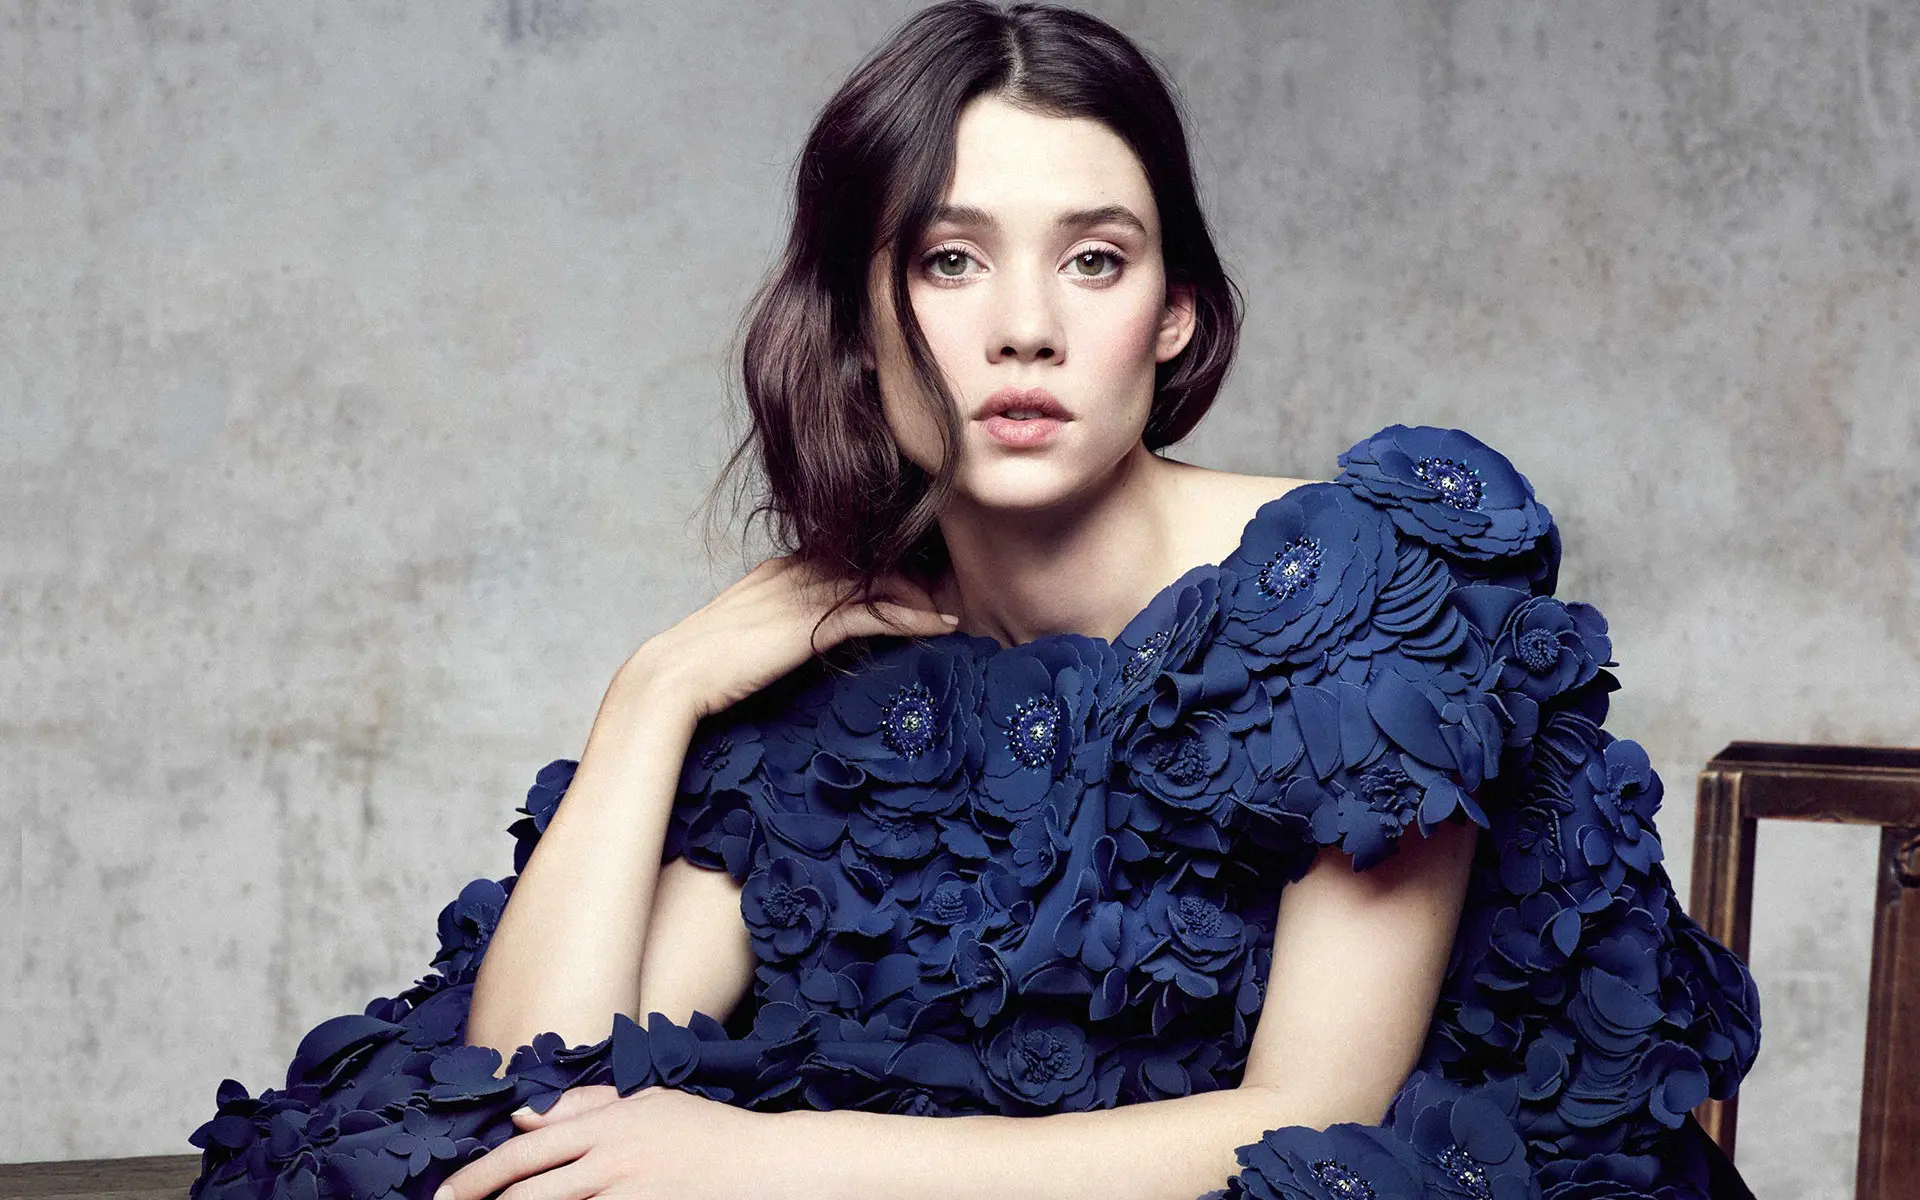 Aktris Astrid Berges-Frisbey. (hdwallpapers.in)